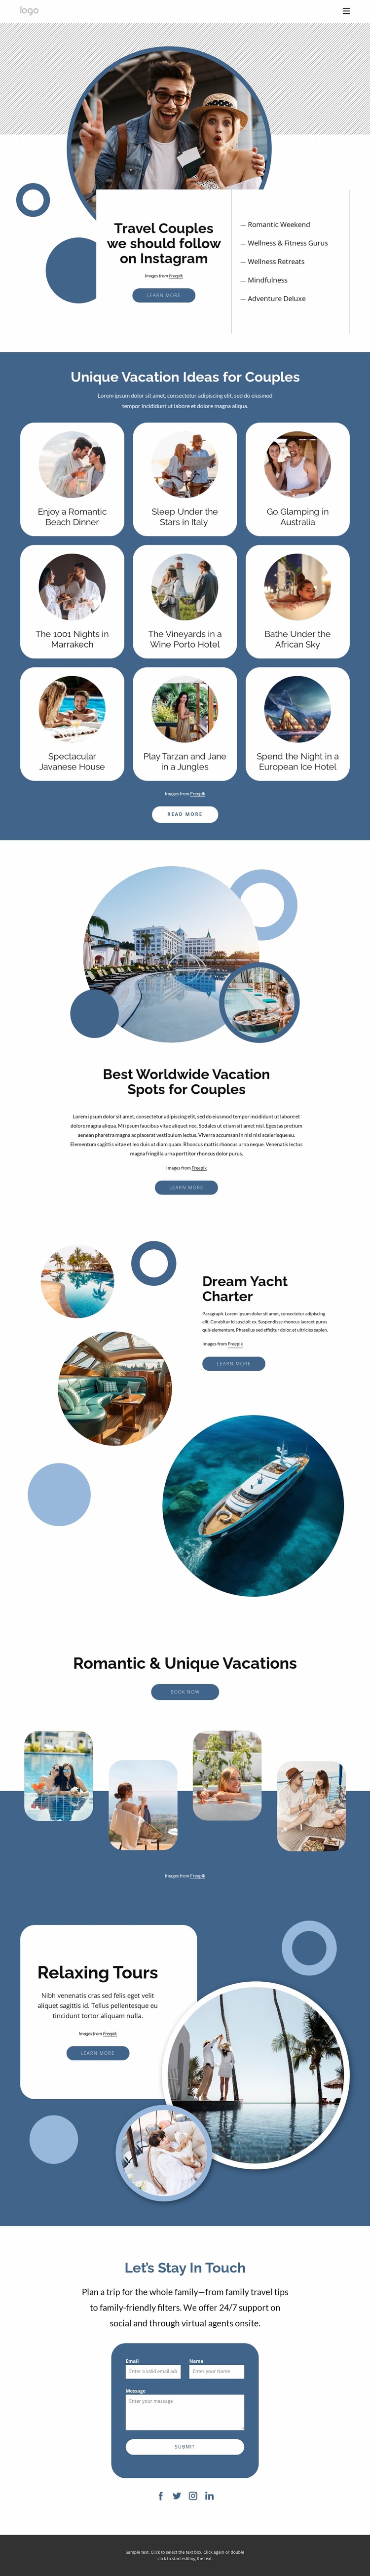 Imagine travelling to some of the most amazing places Ecommerce Website Design